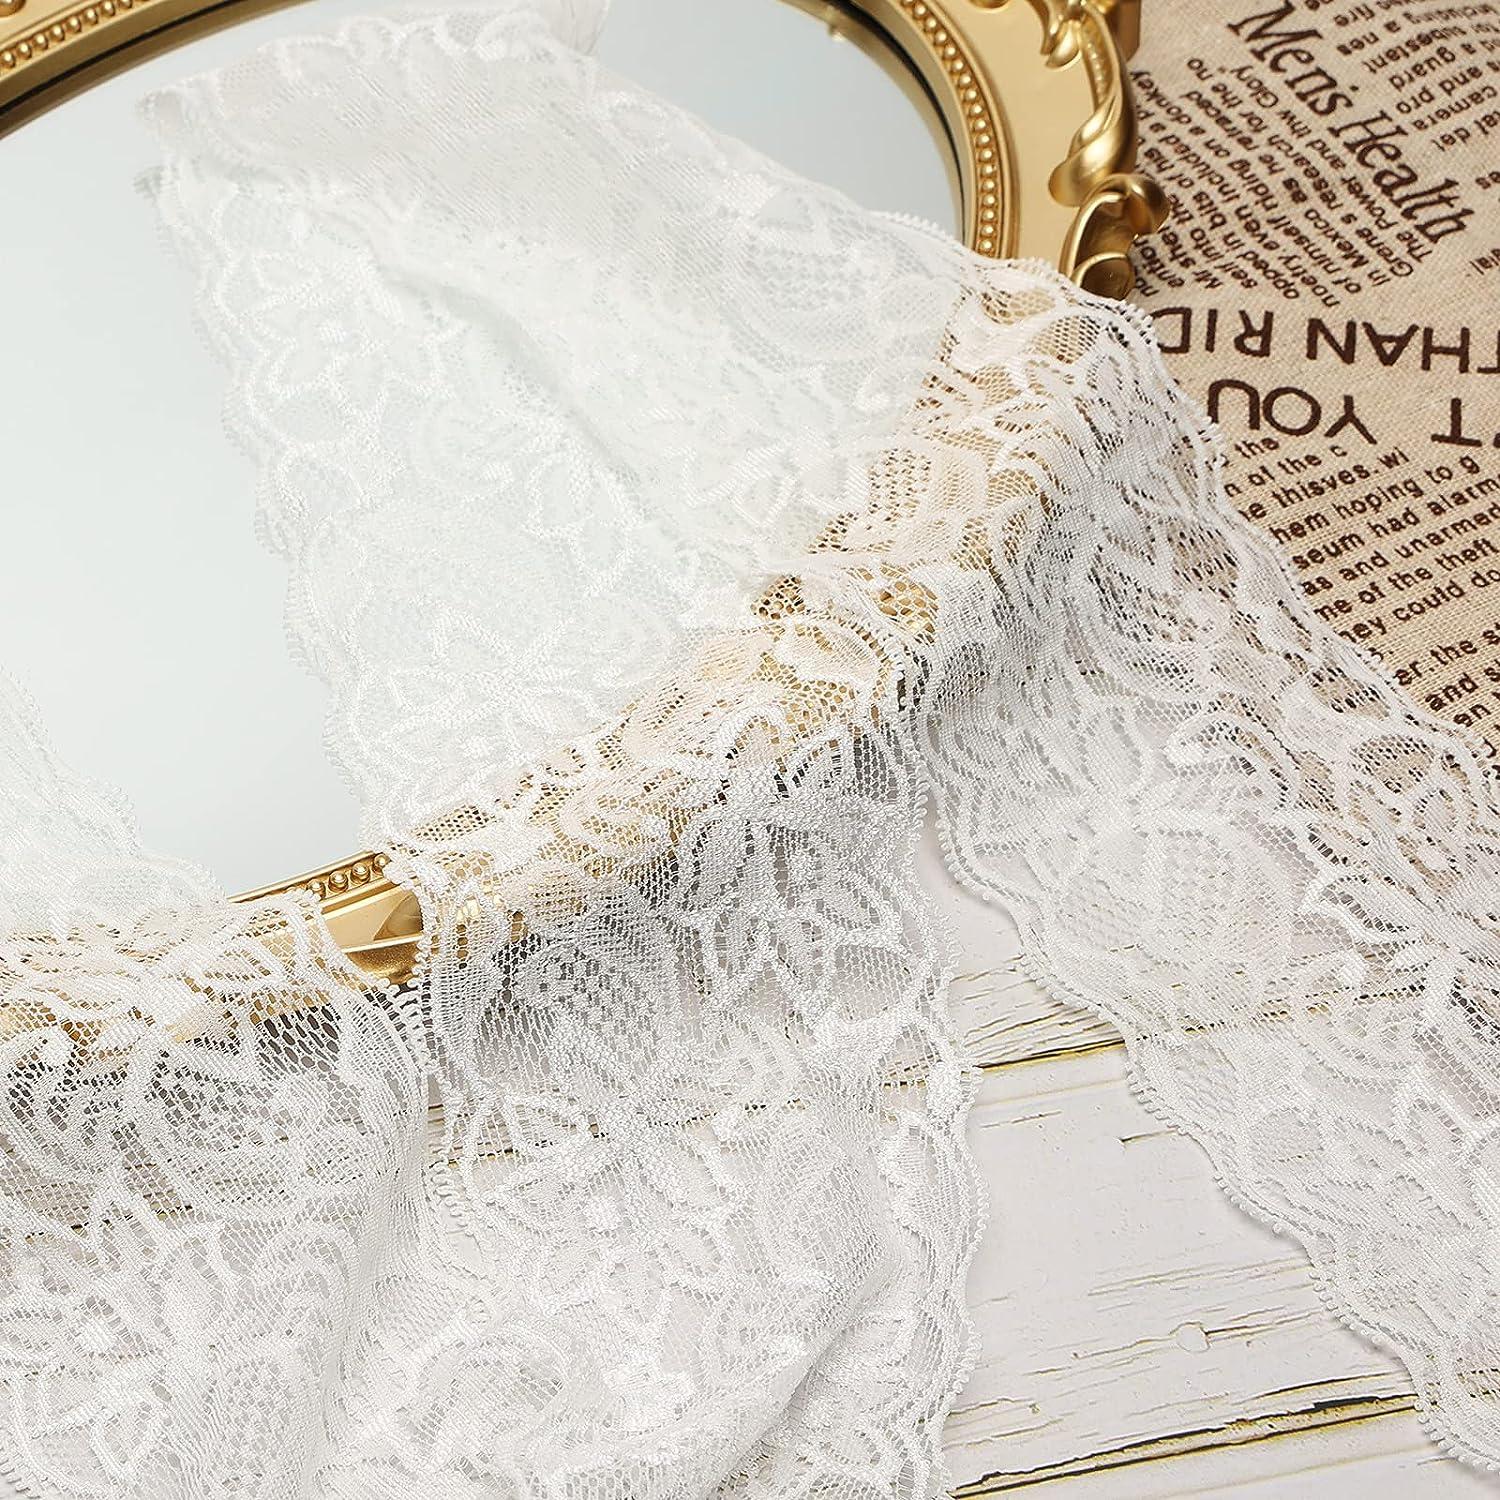 Gold Lace Trim Ribbon 20% DISCOUNT 1 Inch Wide White 